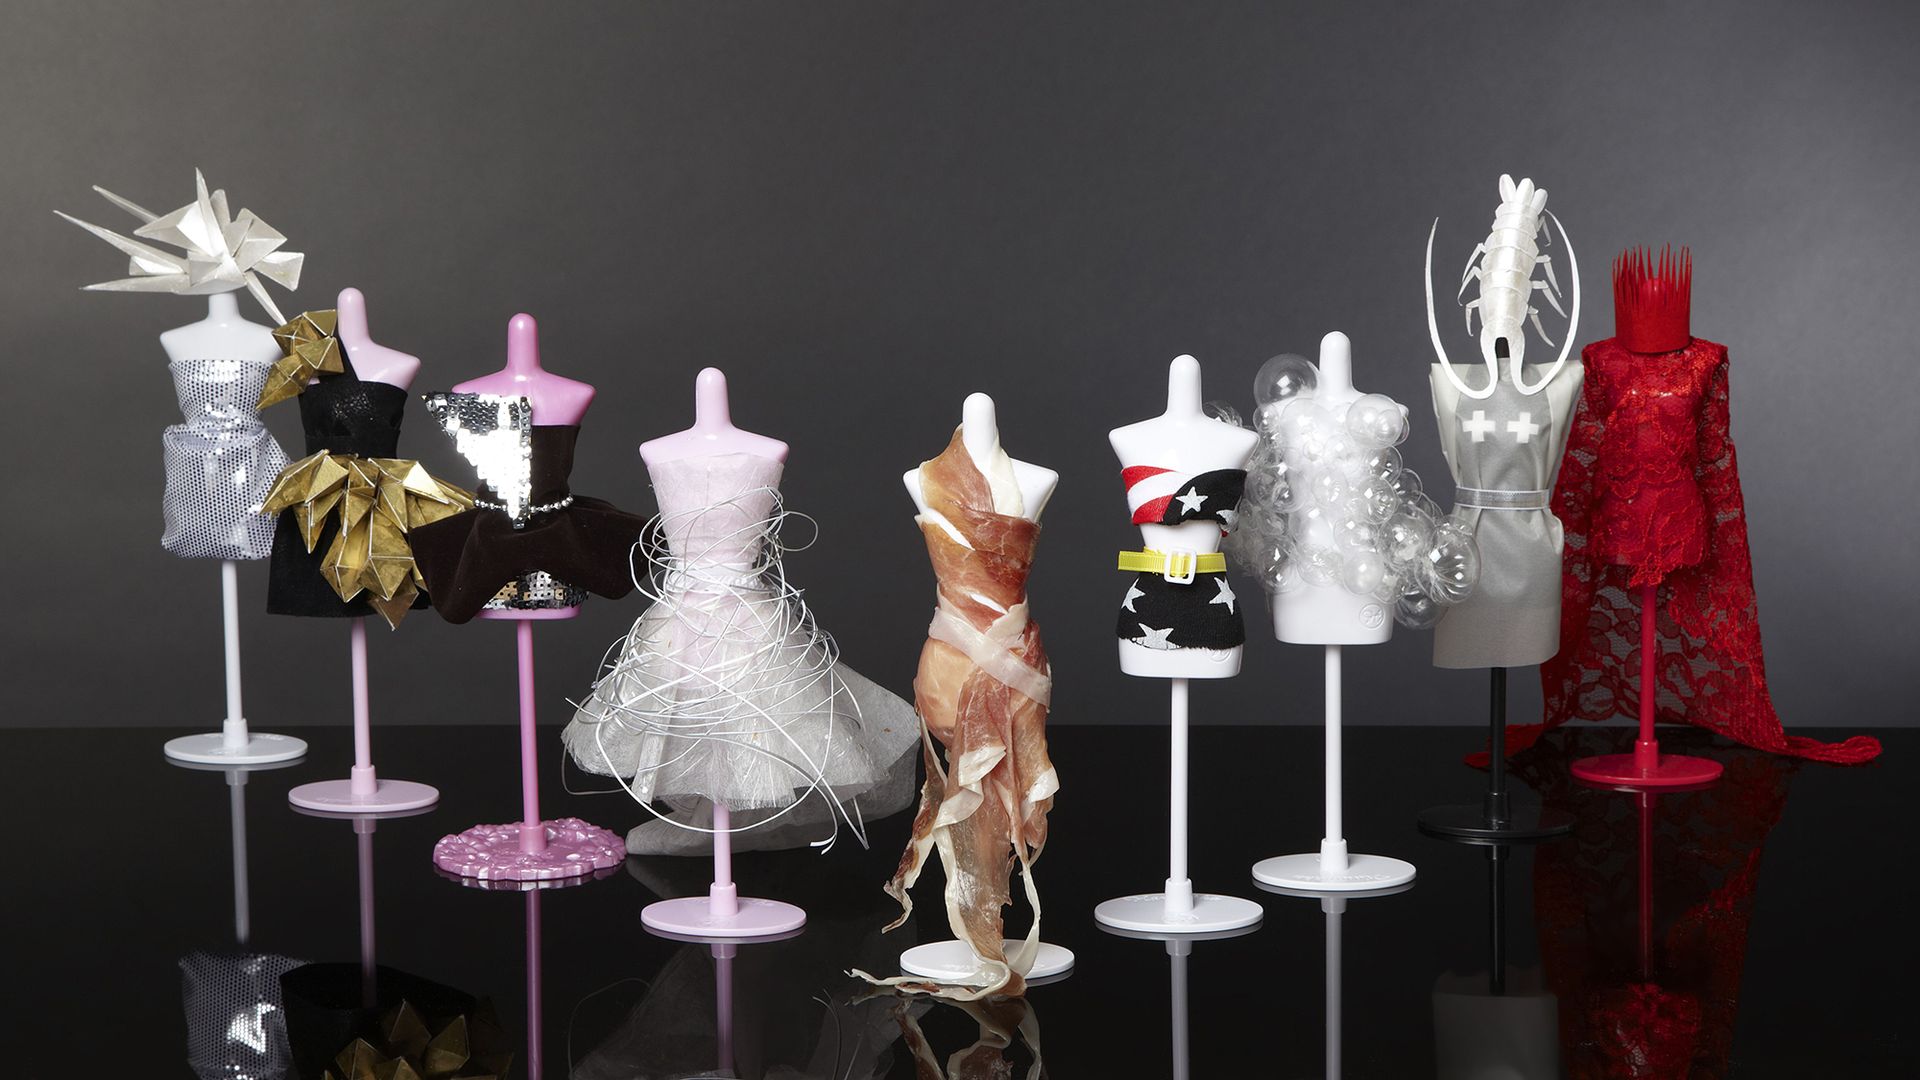 Miniatures of Lady Gaga’s most outrageous dresses